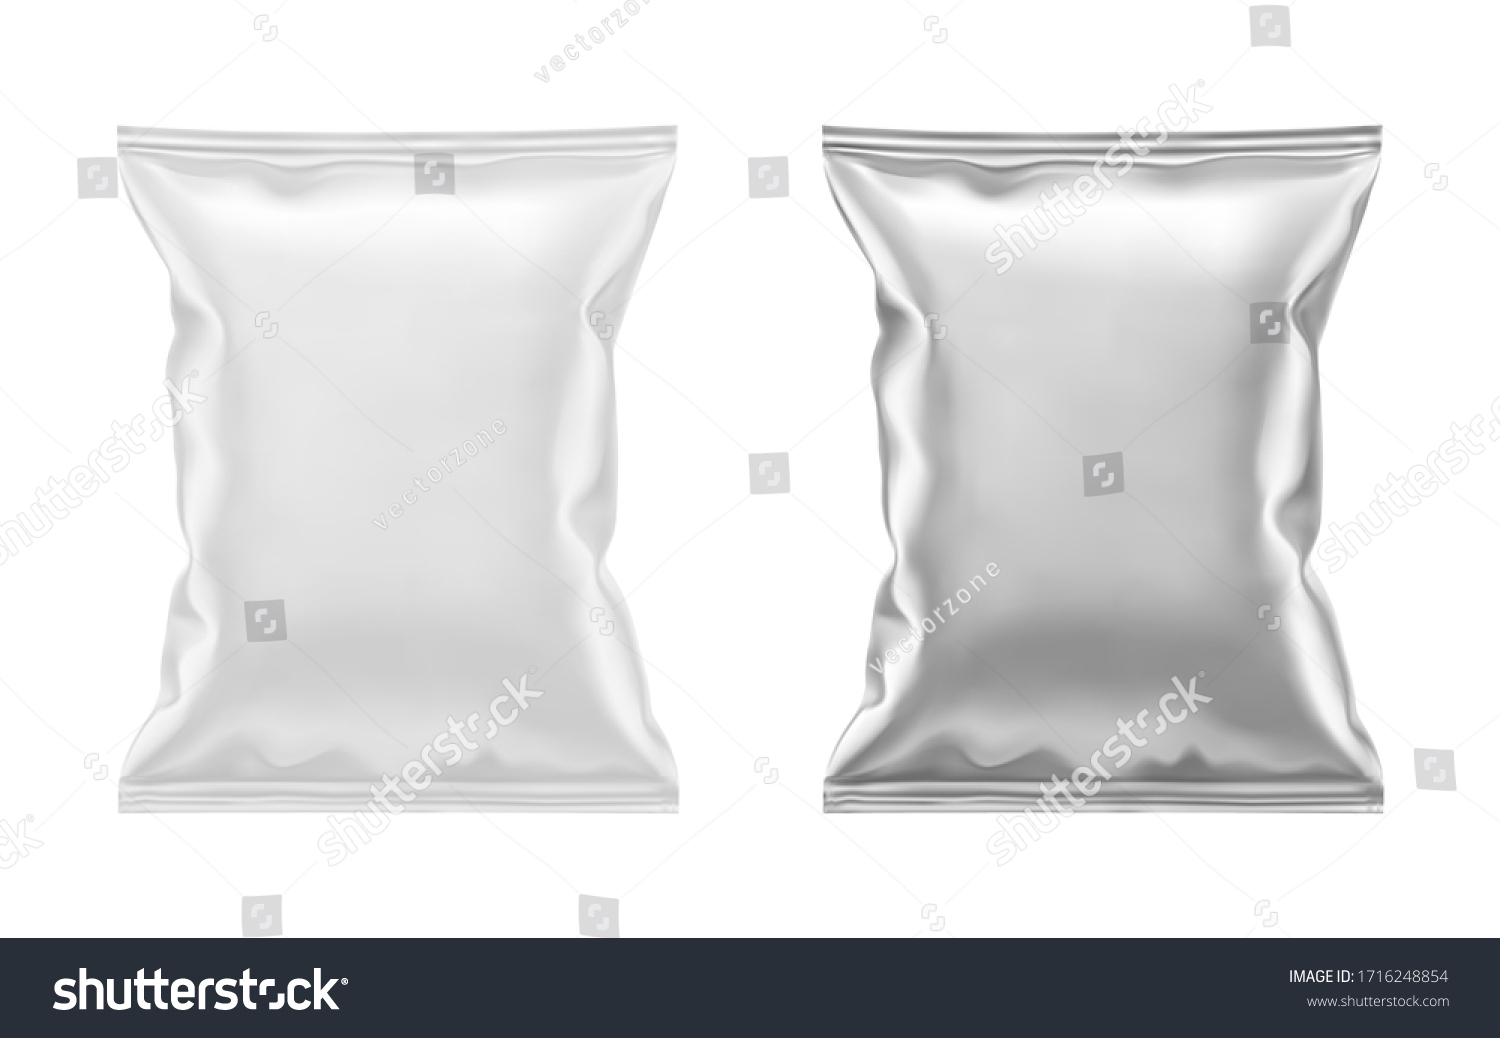 SVG of Vector blank white plastic and silver metallic foil bag for packaging design. Mockup template for food snack, chips, cookies, peanuts, candy. Realistic illustration Isolated on white background svg